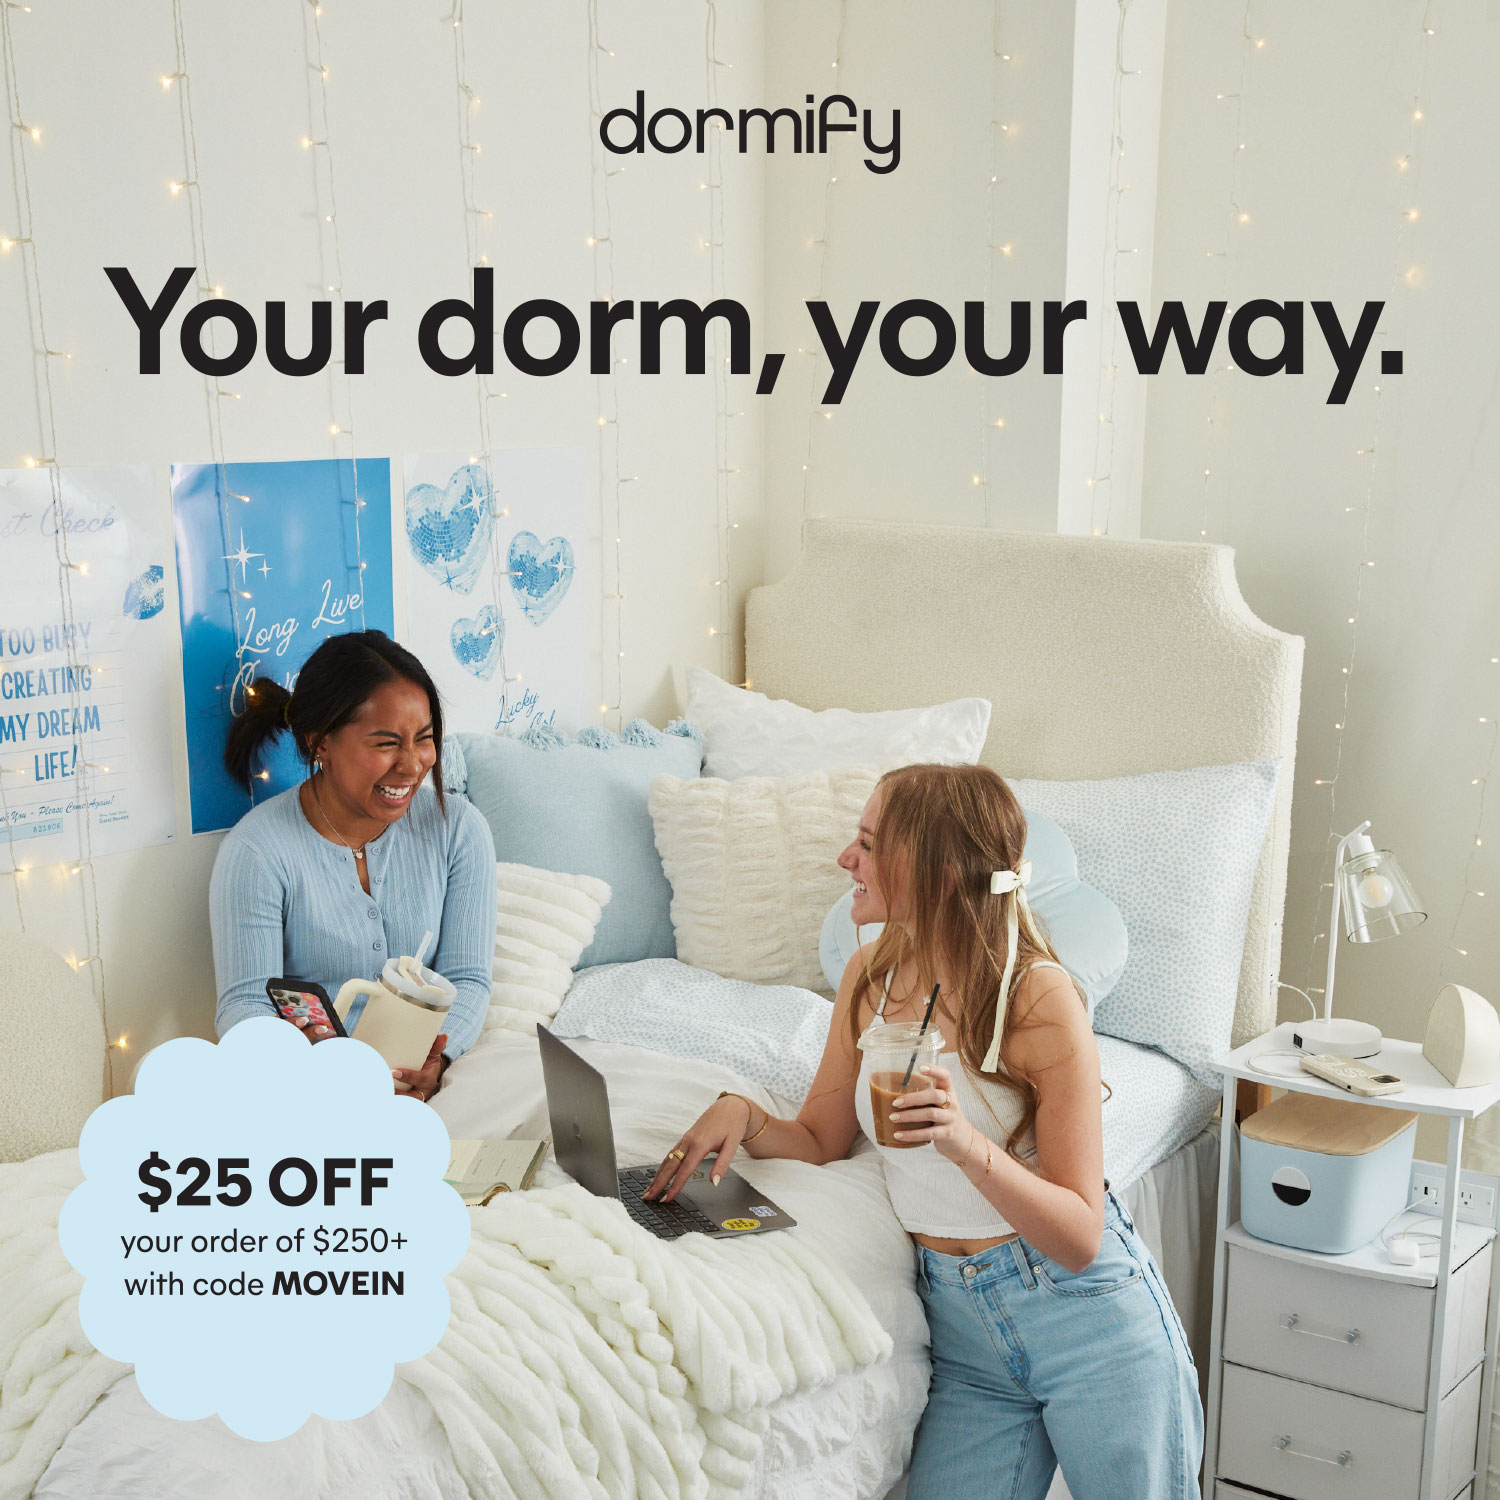 Dormify. Your dorm, your way. US$25 off your order of US$250+ with code MOVEIN.